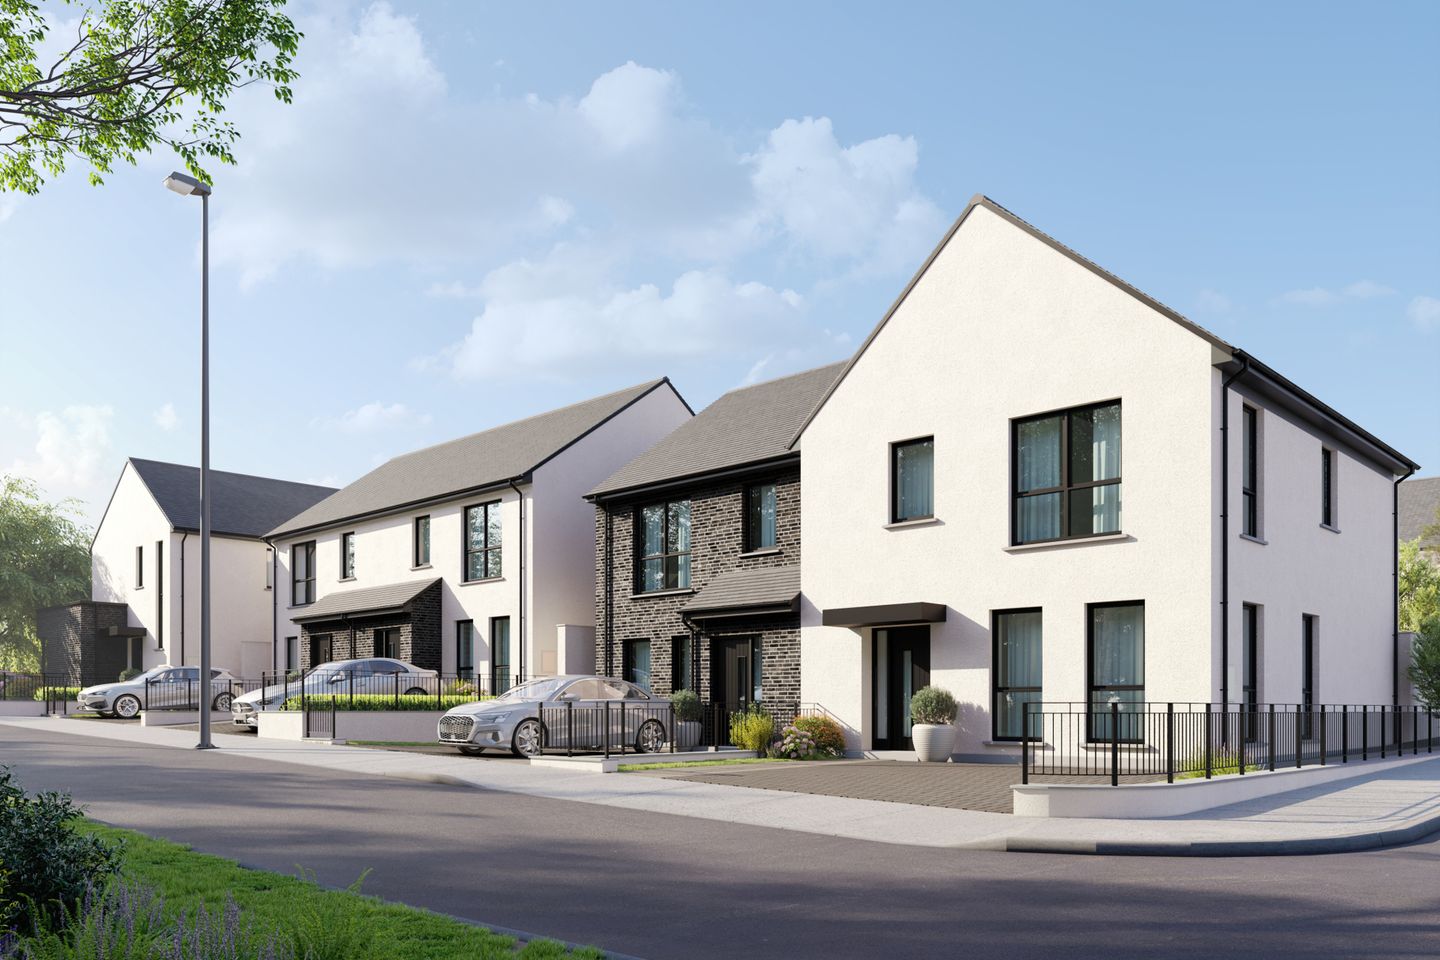 Three Bed Mid Terraced, Lakeview, Three Bed Mid Terraced, Lakeview, Castleredmond, Midleton, Co. Cork